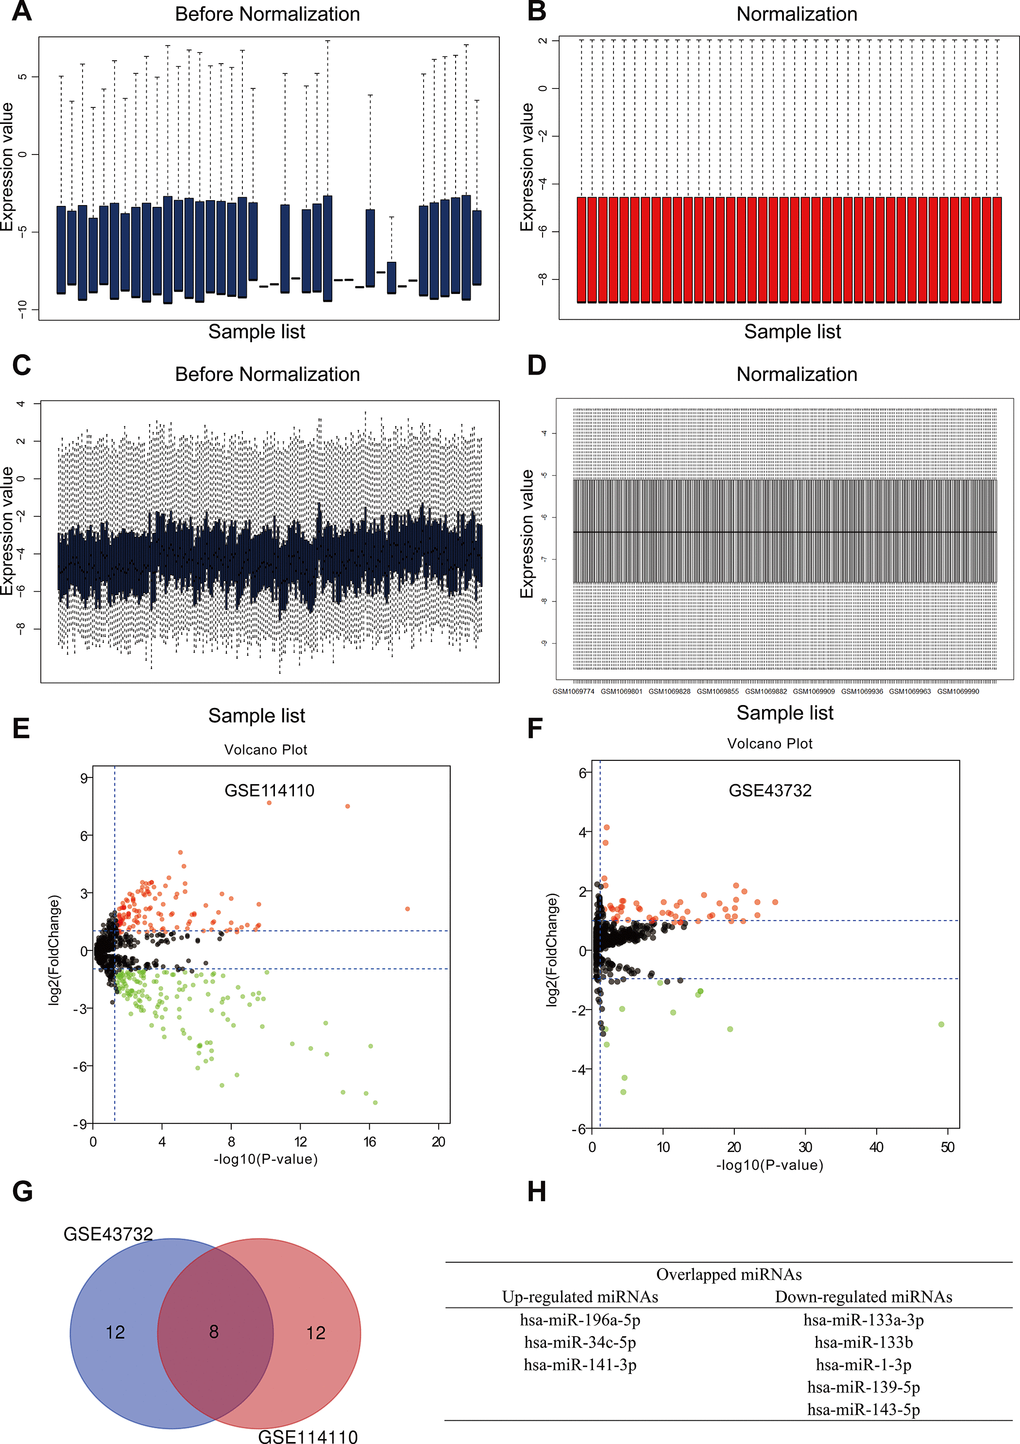 Identification of differently expressed miRNAs (DEMs) in esophageal squamous cell carcinoma (ESCC). (A, B) GSE114110 data before and after normalization. (C, D) GSE43732 data before and after normalization. (E, F) Volcano plots of DEMs in GSE114110 and GSE43732, respectively. Black dots represent genes equally represented between ESCC and normal samples. Red and green dots represent upregulated and downregulated miRNAs, respectively. Volcano plots showing all DEMs. |log2FC| ≥ 1 and P G) Venn diagram analysis showing the top 10 upregulated and downregulated miRNAs in the two GEO datasets. (H) Identification of three upregulated and five downregulated miRNAs overlapping between both GEO datasets.